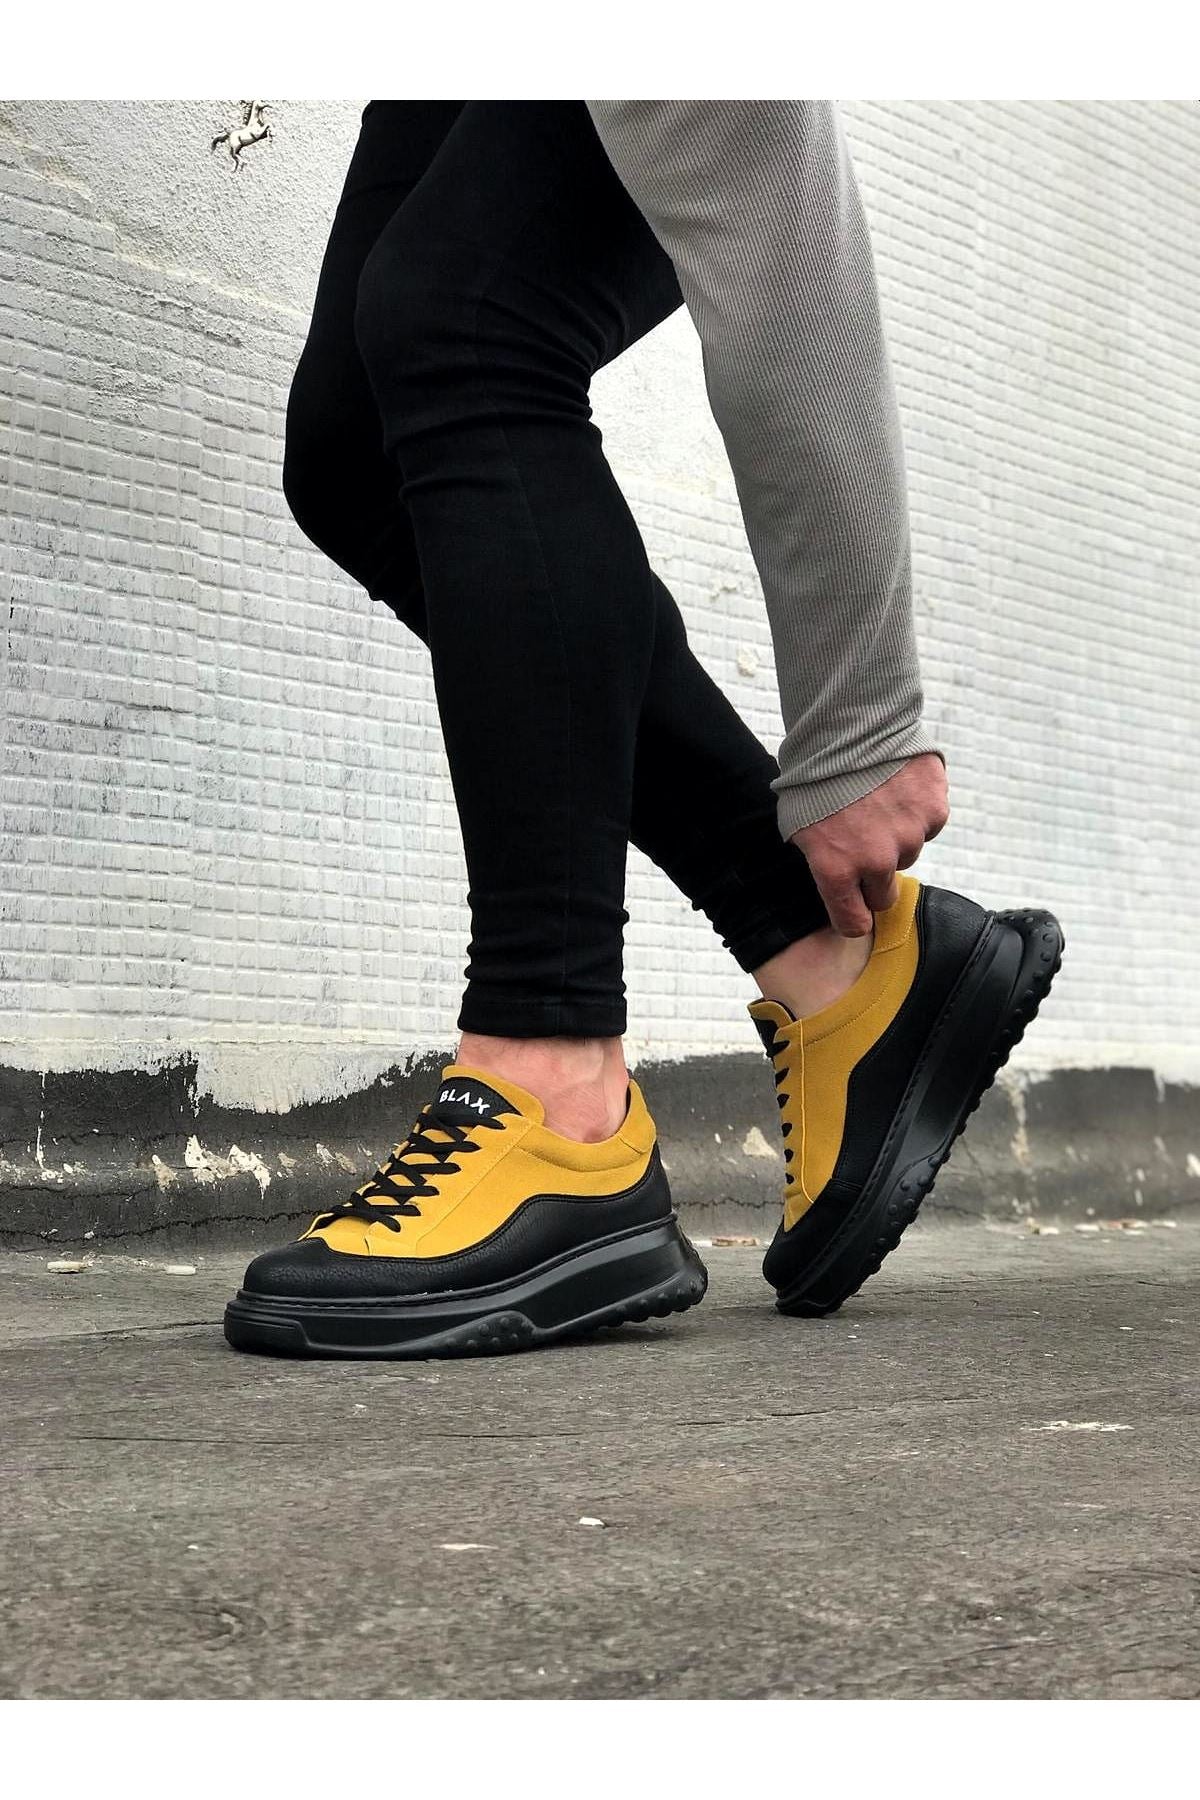 WG507 Charcoal Yellow Men's Shoes - STREETMODE ™